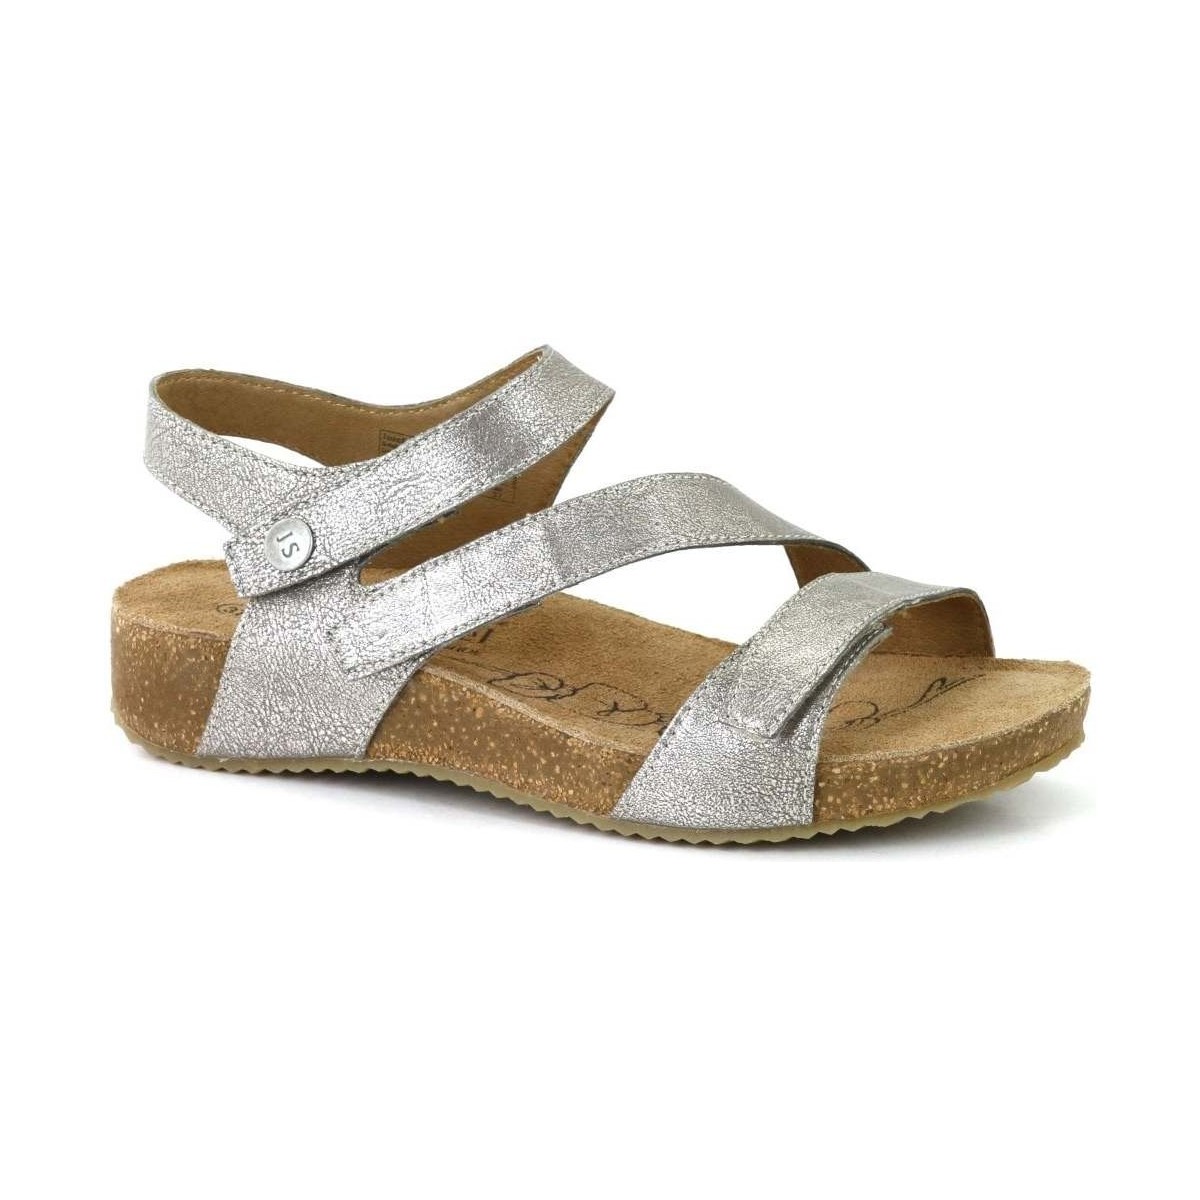 Shoes Women Sandals Josef Seibel Tonga 25 Womens Leather Sandals Silver